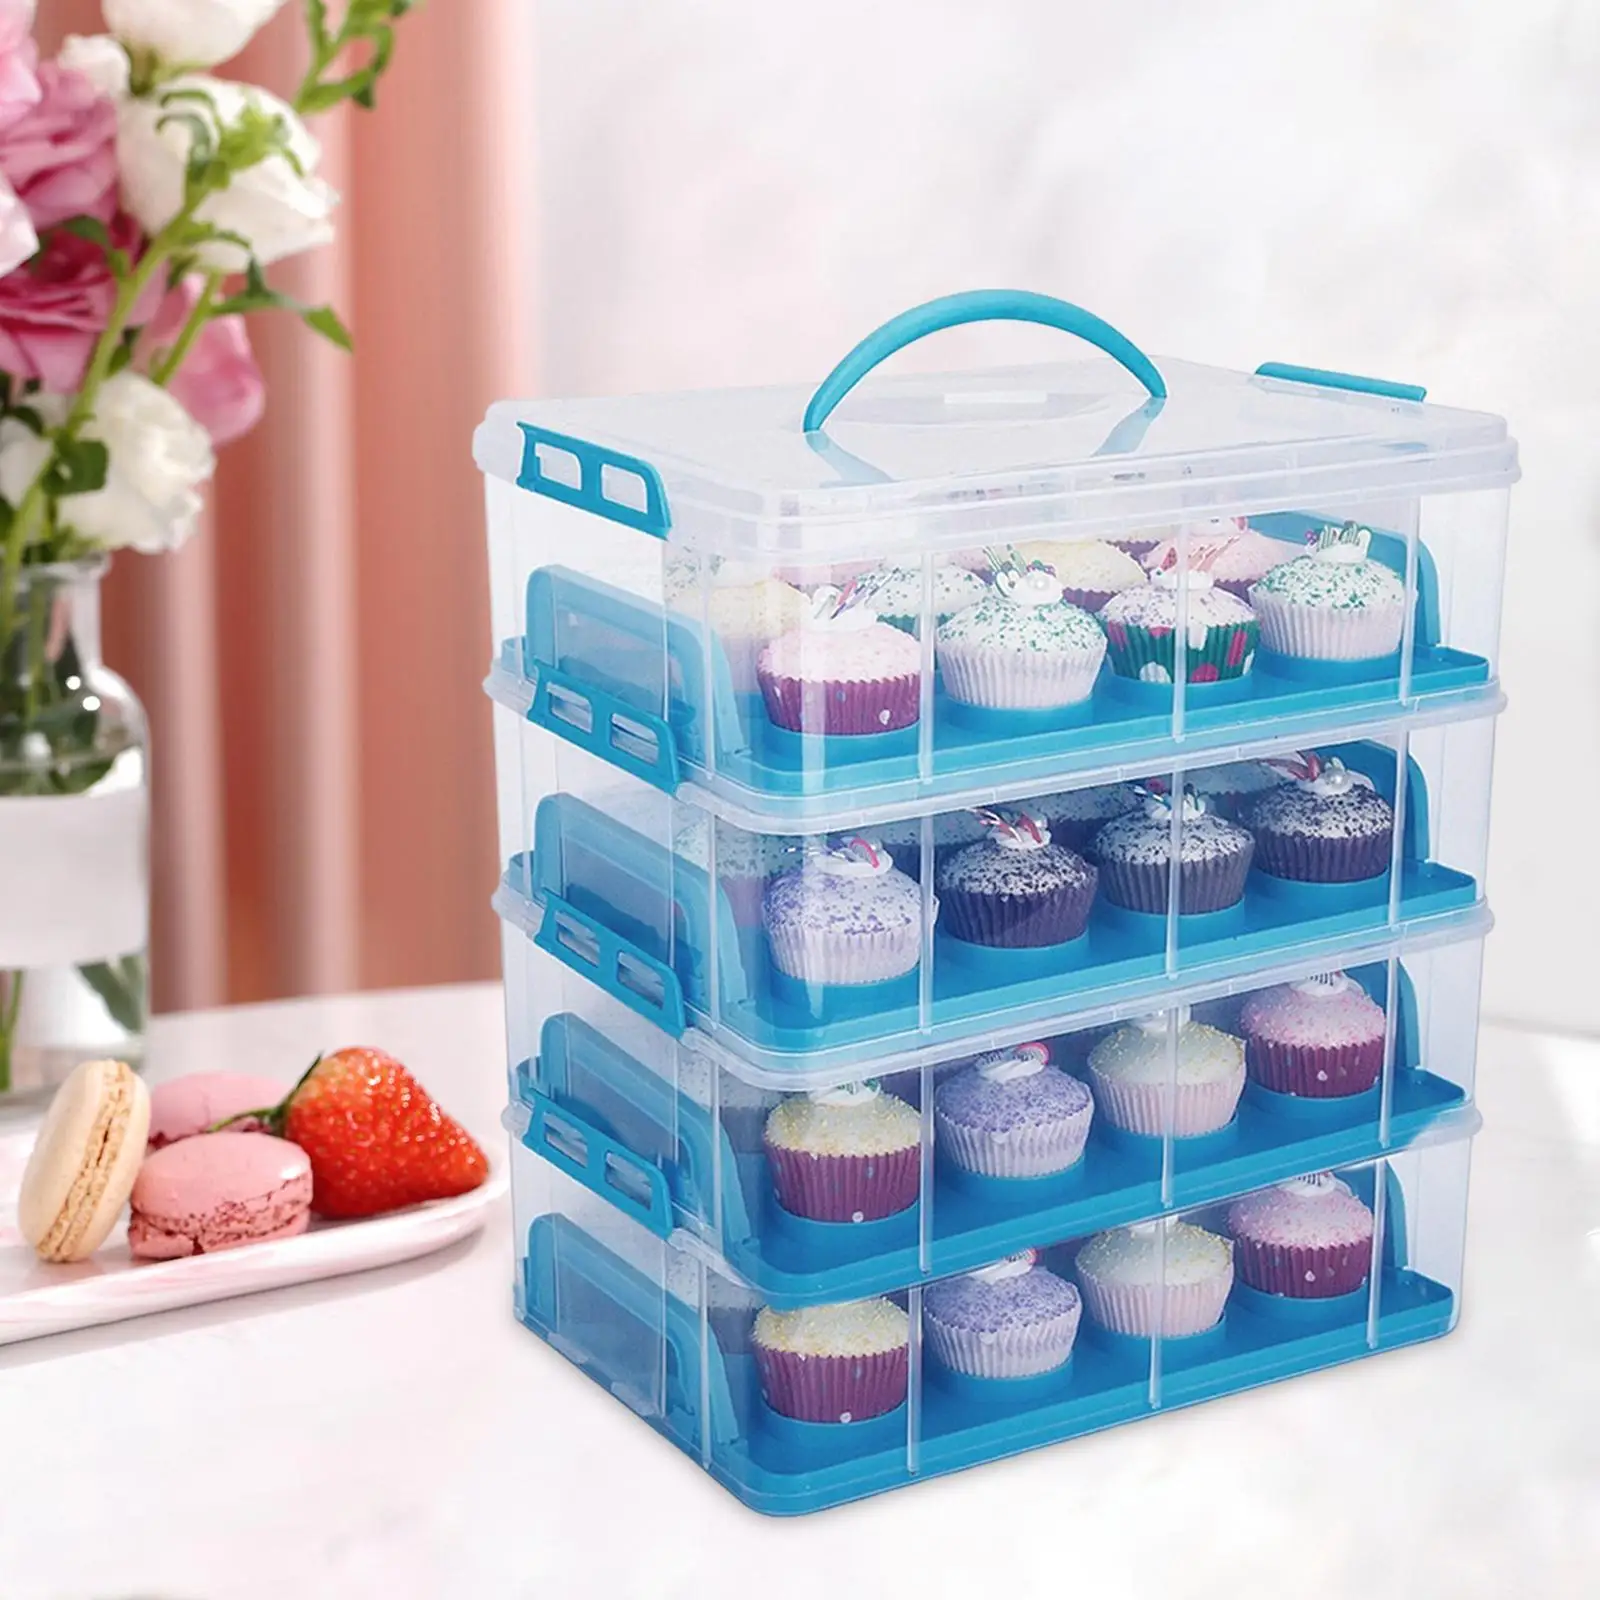 Cupcake Storage Containers Holder Dessert Container Case for Cake Cheesecakes Baking Cupcakes